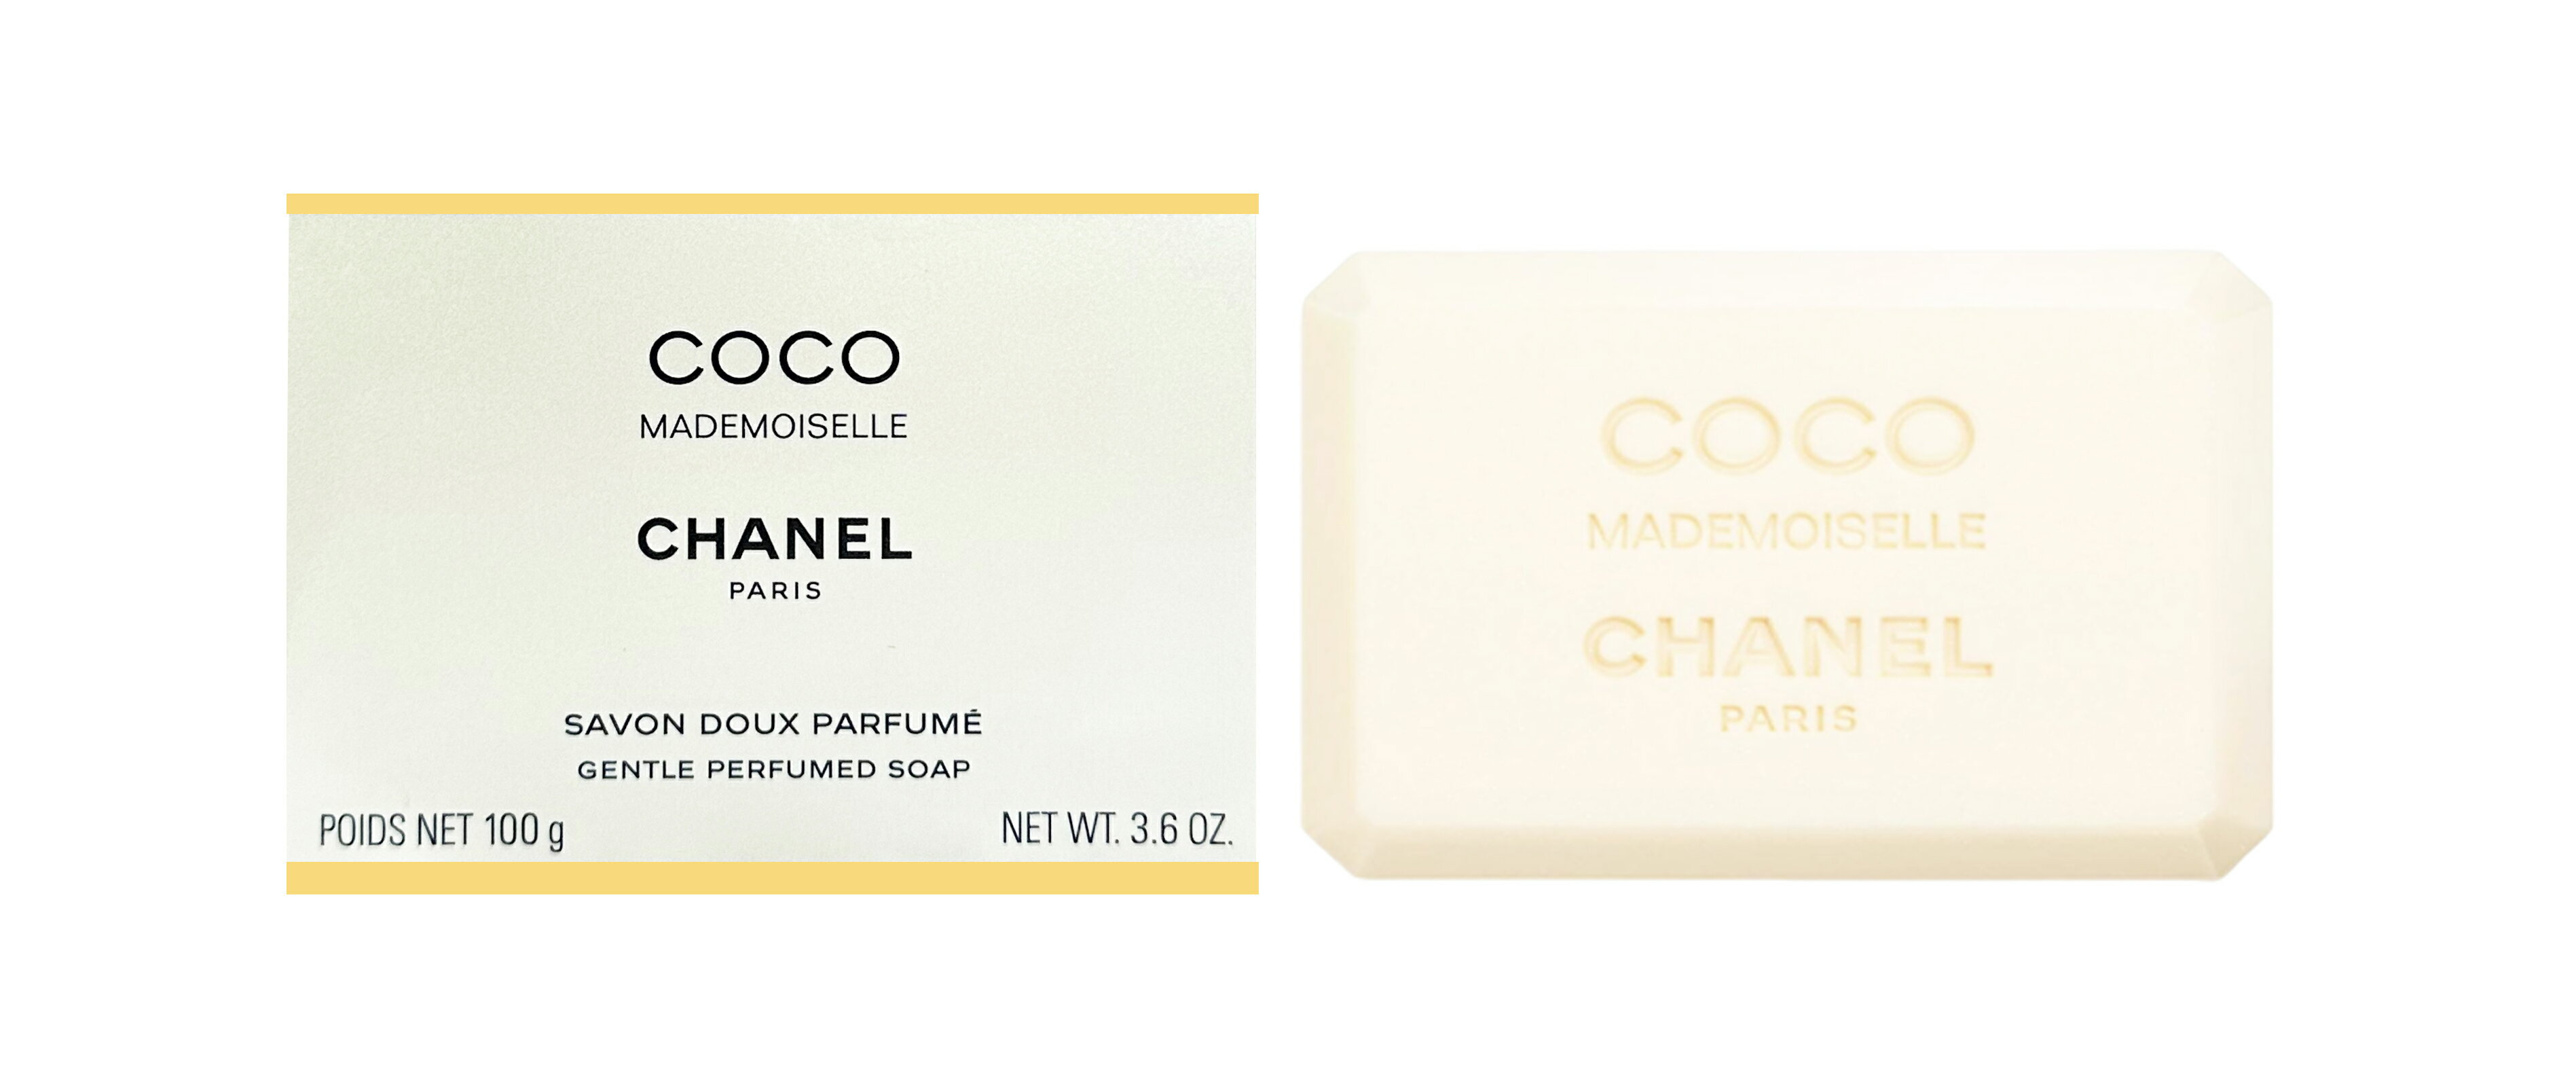 CHANEL - COCO MADEMOISELLE Gentle Perfumed Soap 100g